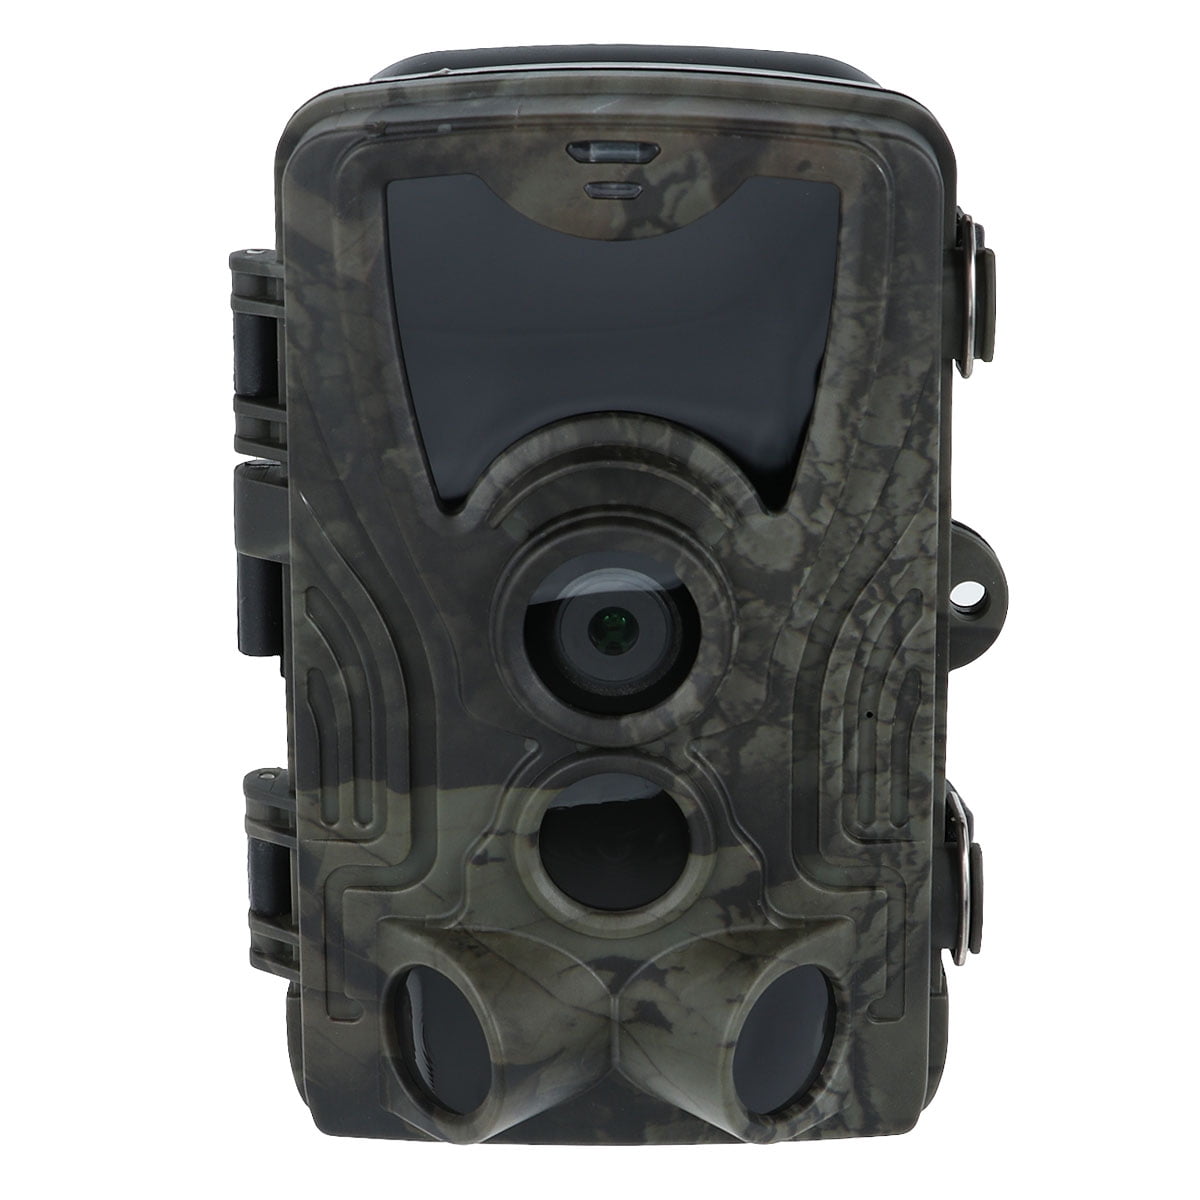 HC-801A Night Vision 1080P Waterproof Infrared Tracking 16MP Hunting Camera 